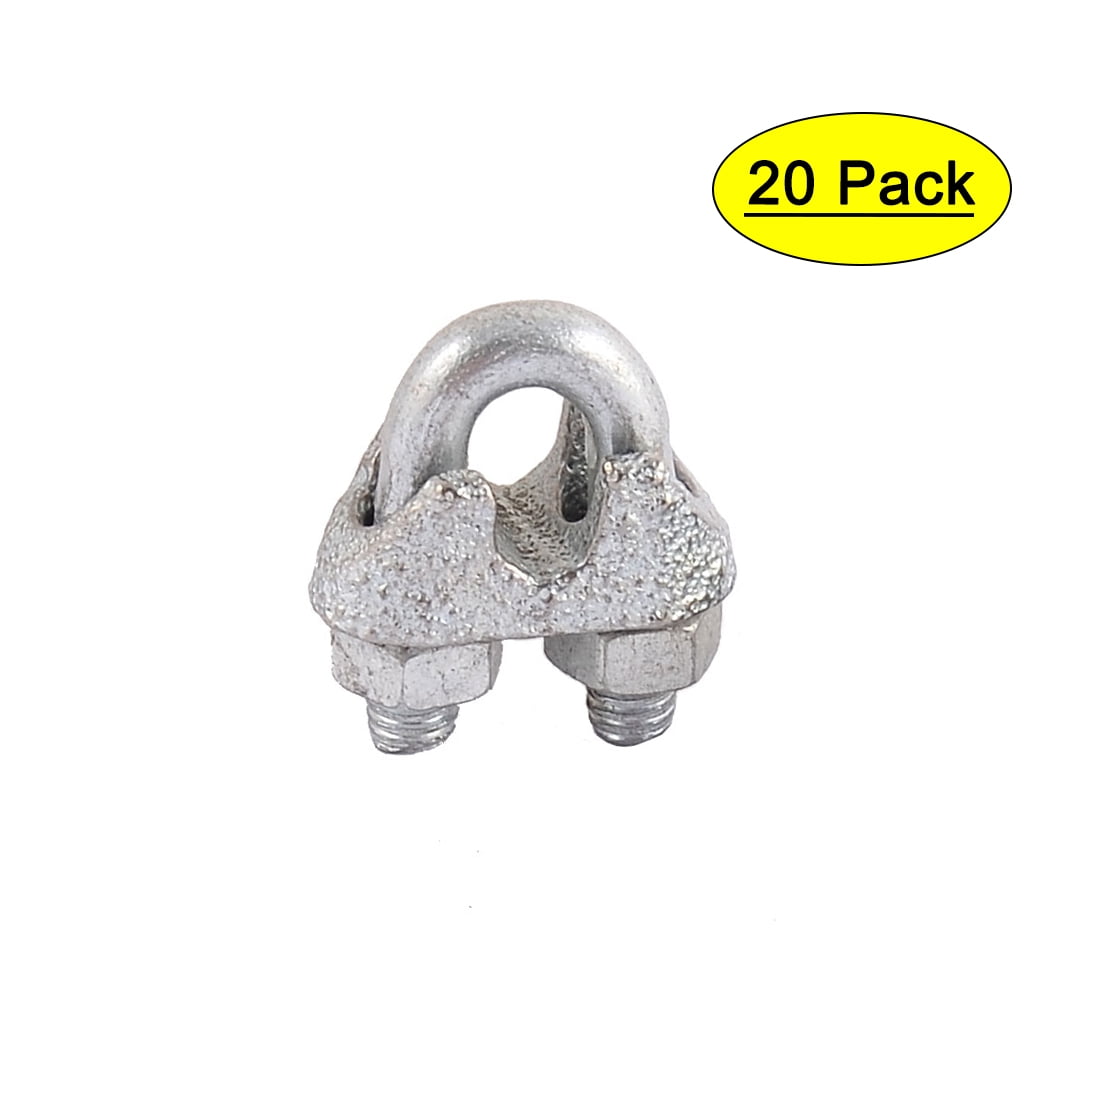 Zinc plated wire rope clamp for multi gym cables 